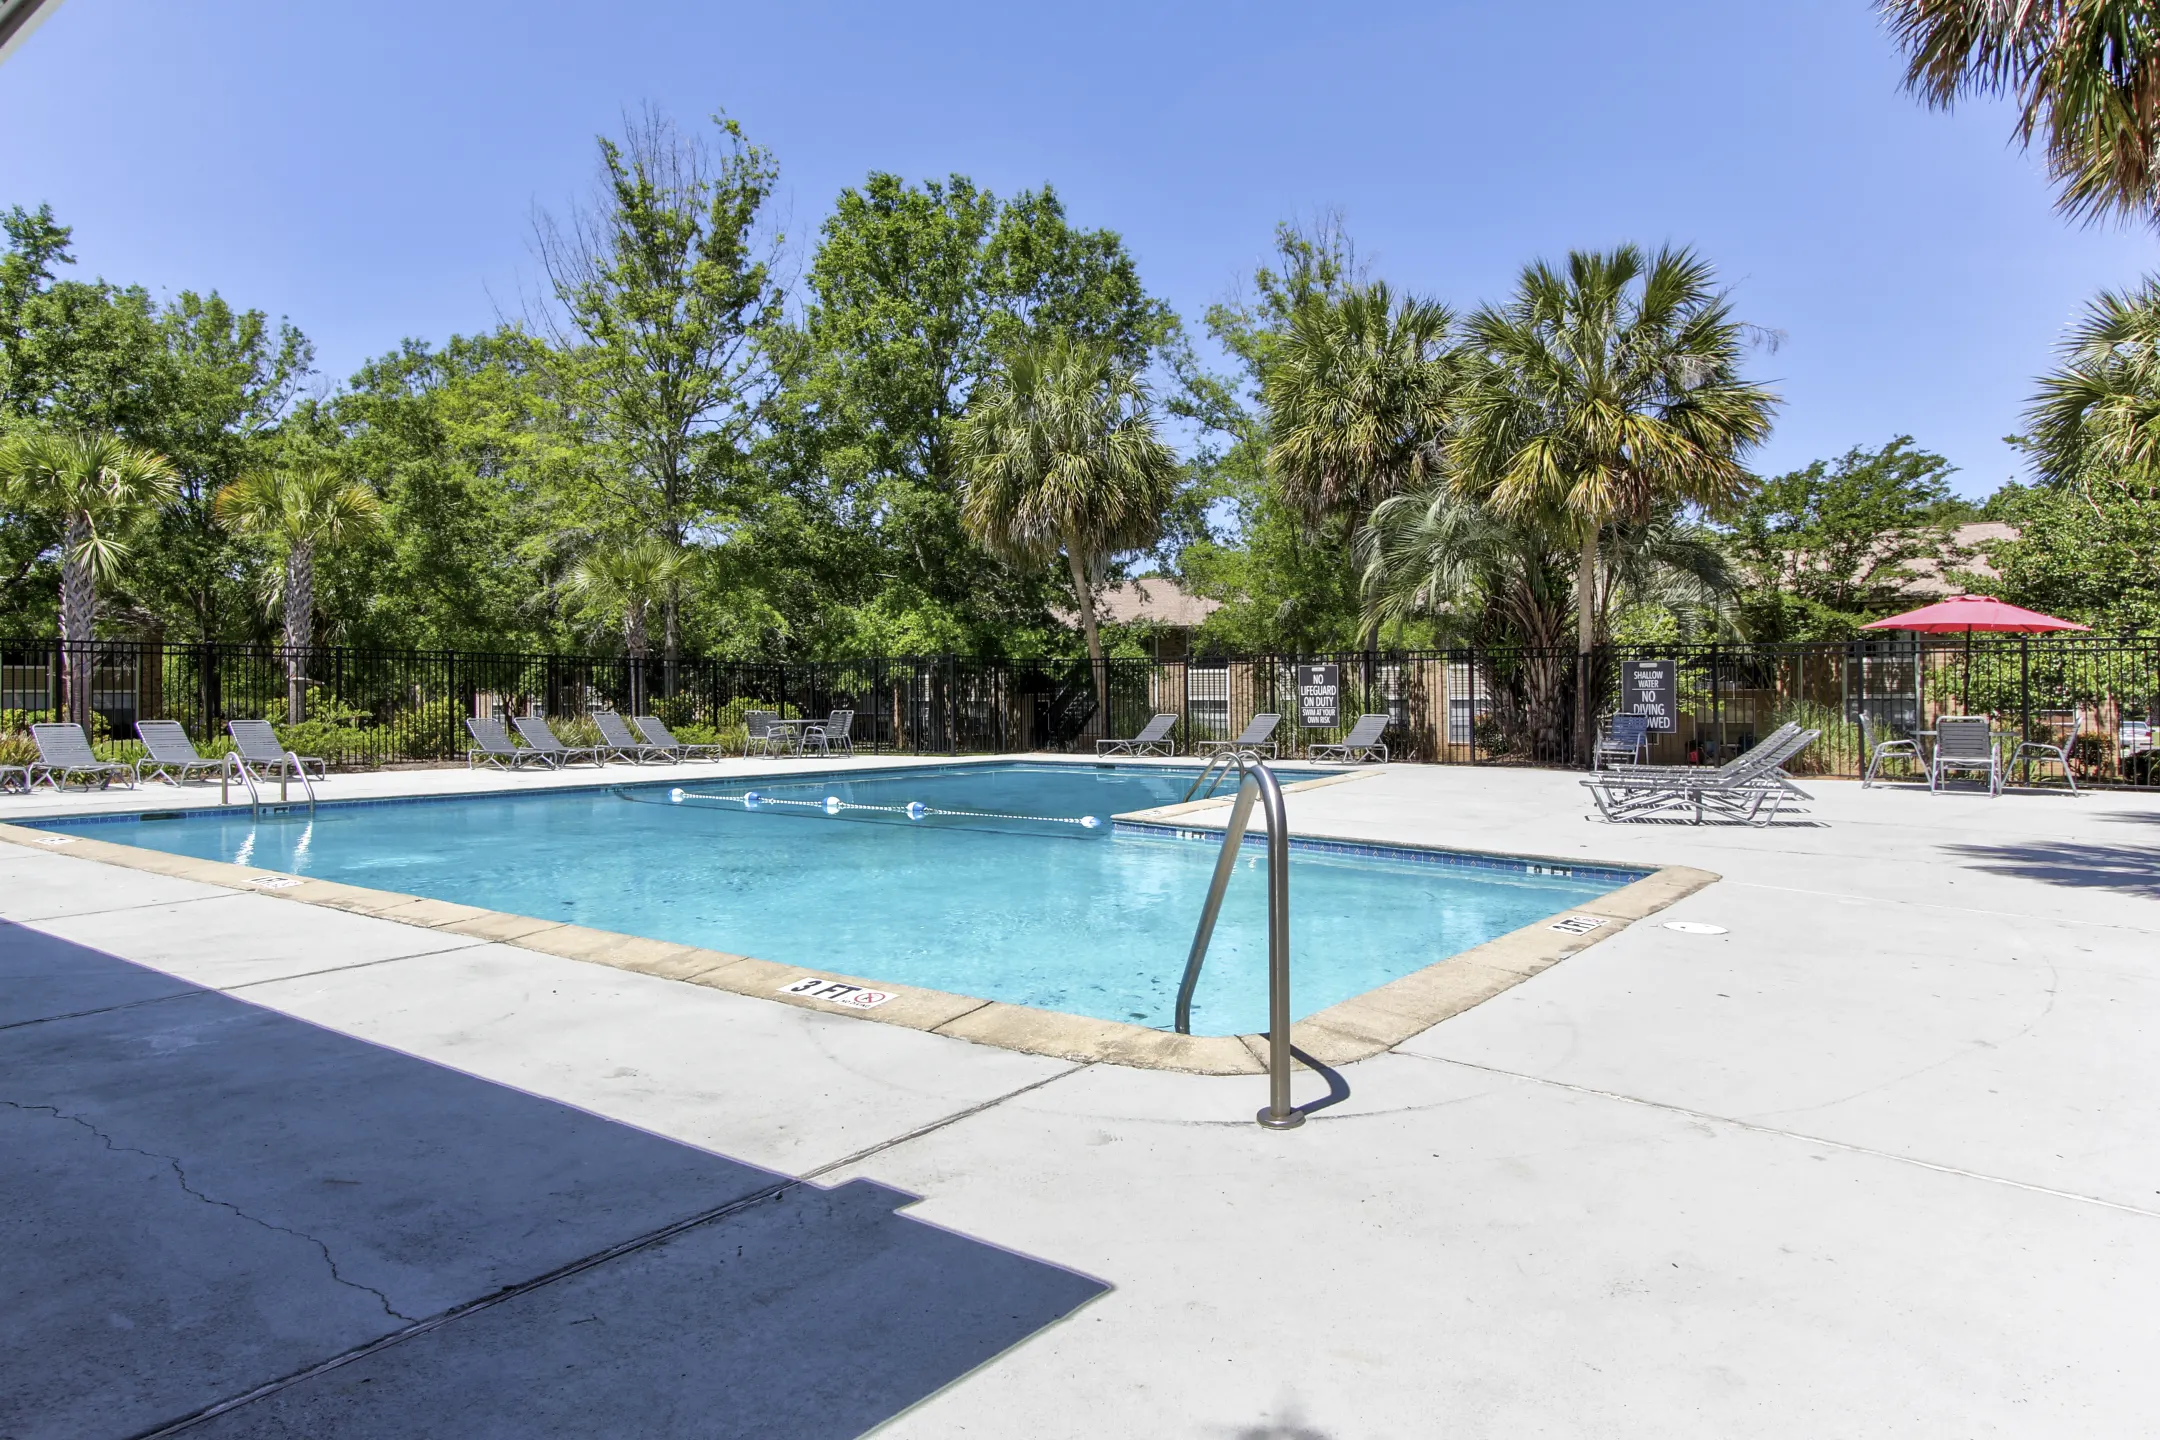 Pool - Chester Place Apartments and Townhomes - North Charleston, SC